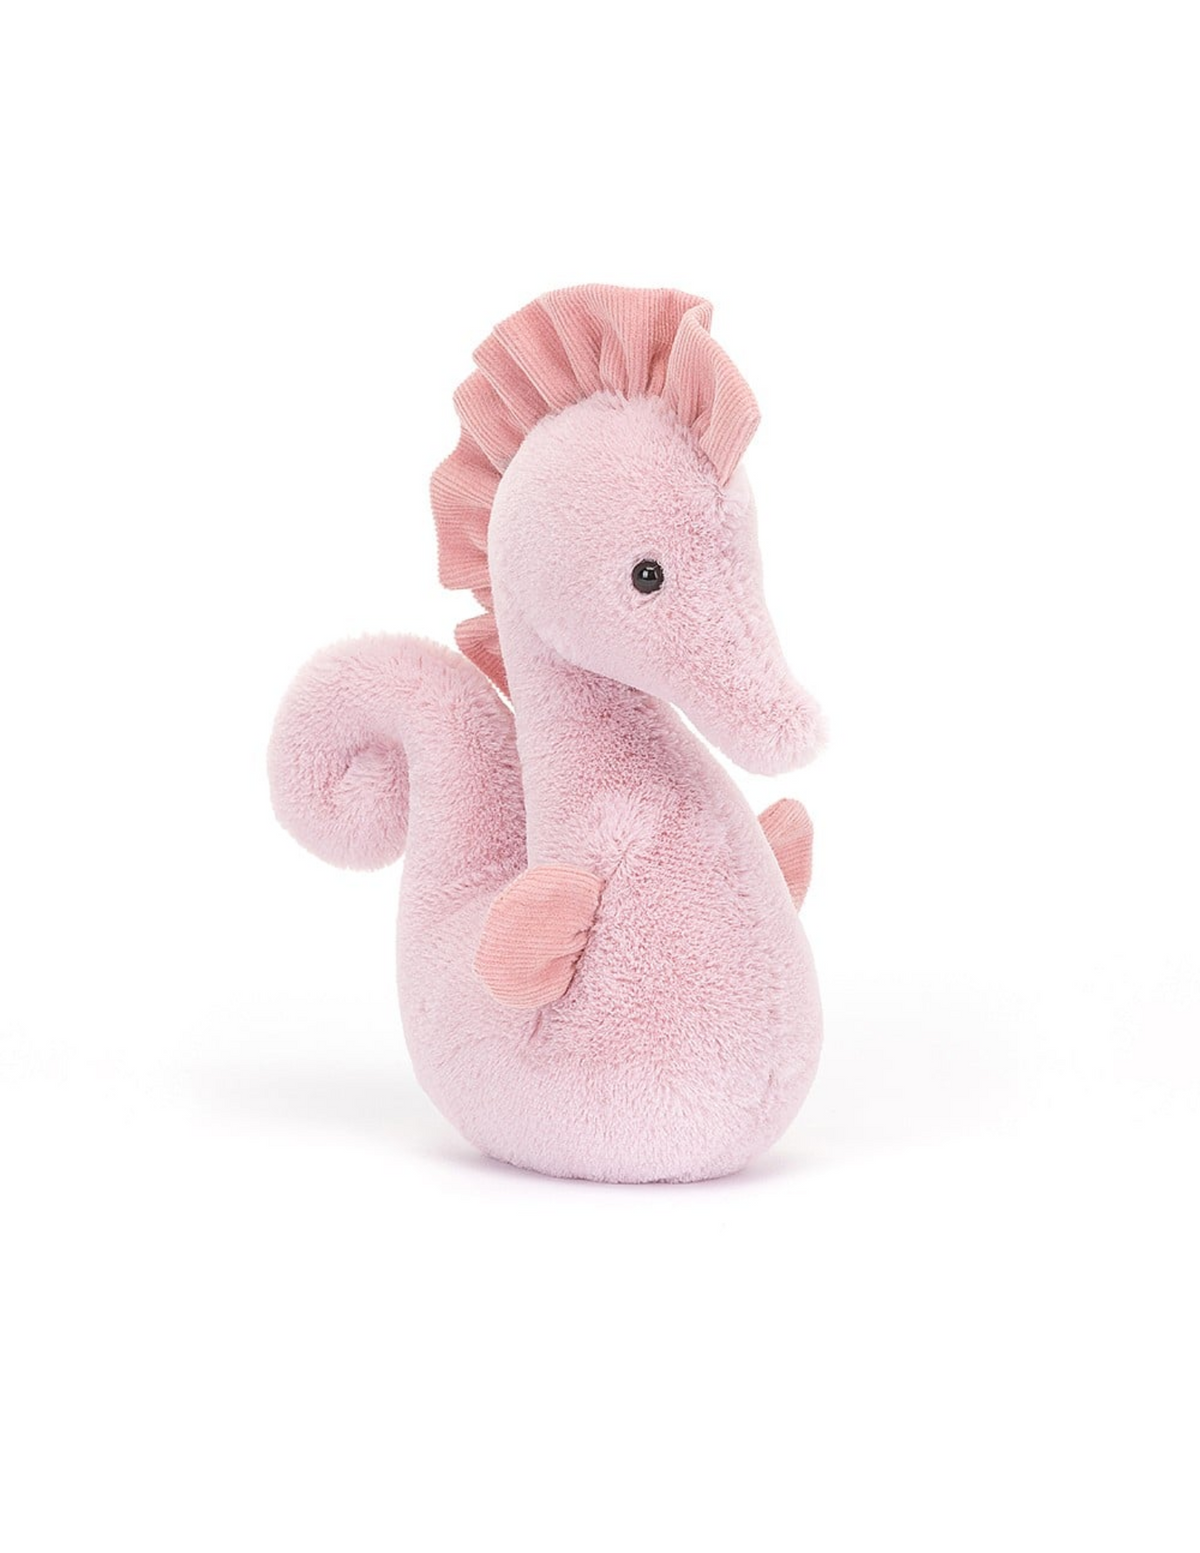 Jellycat Sienna Seahorse | Small